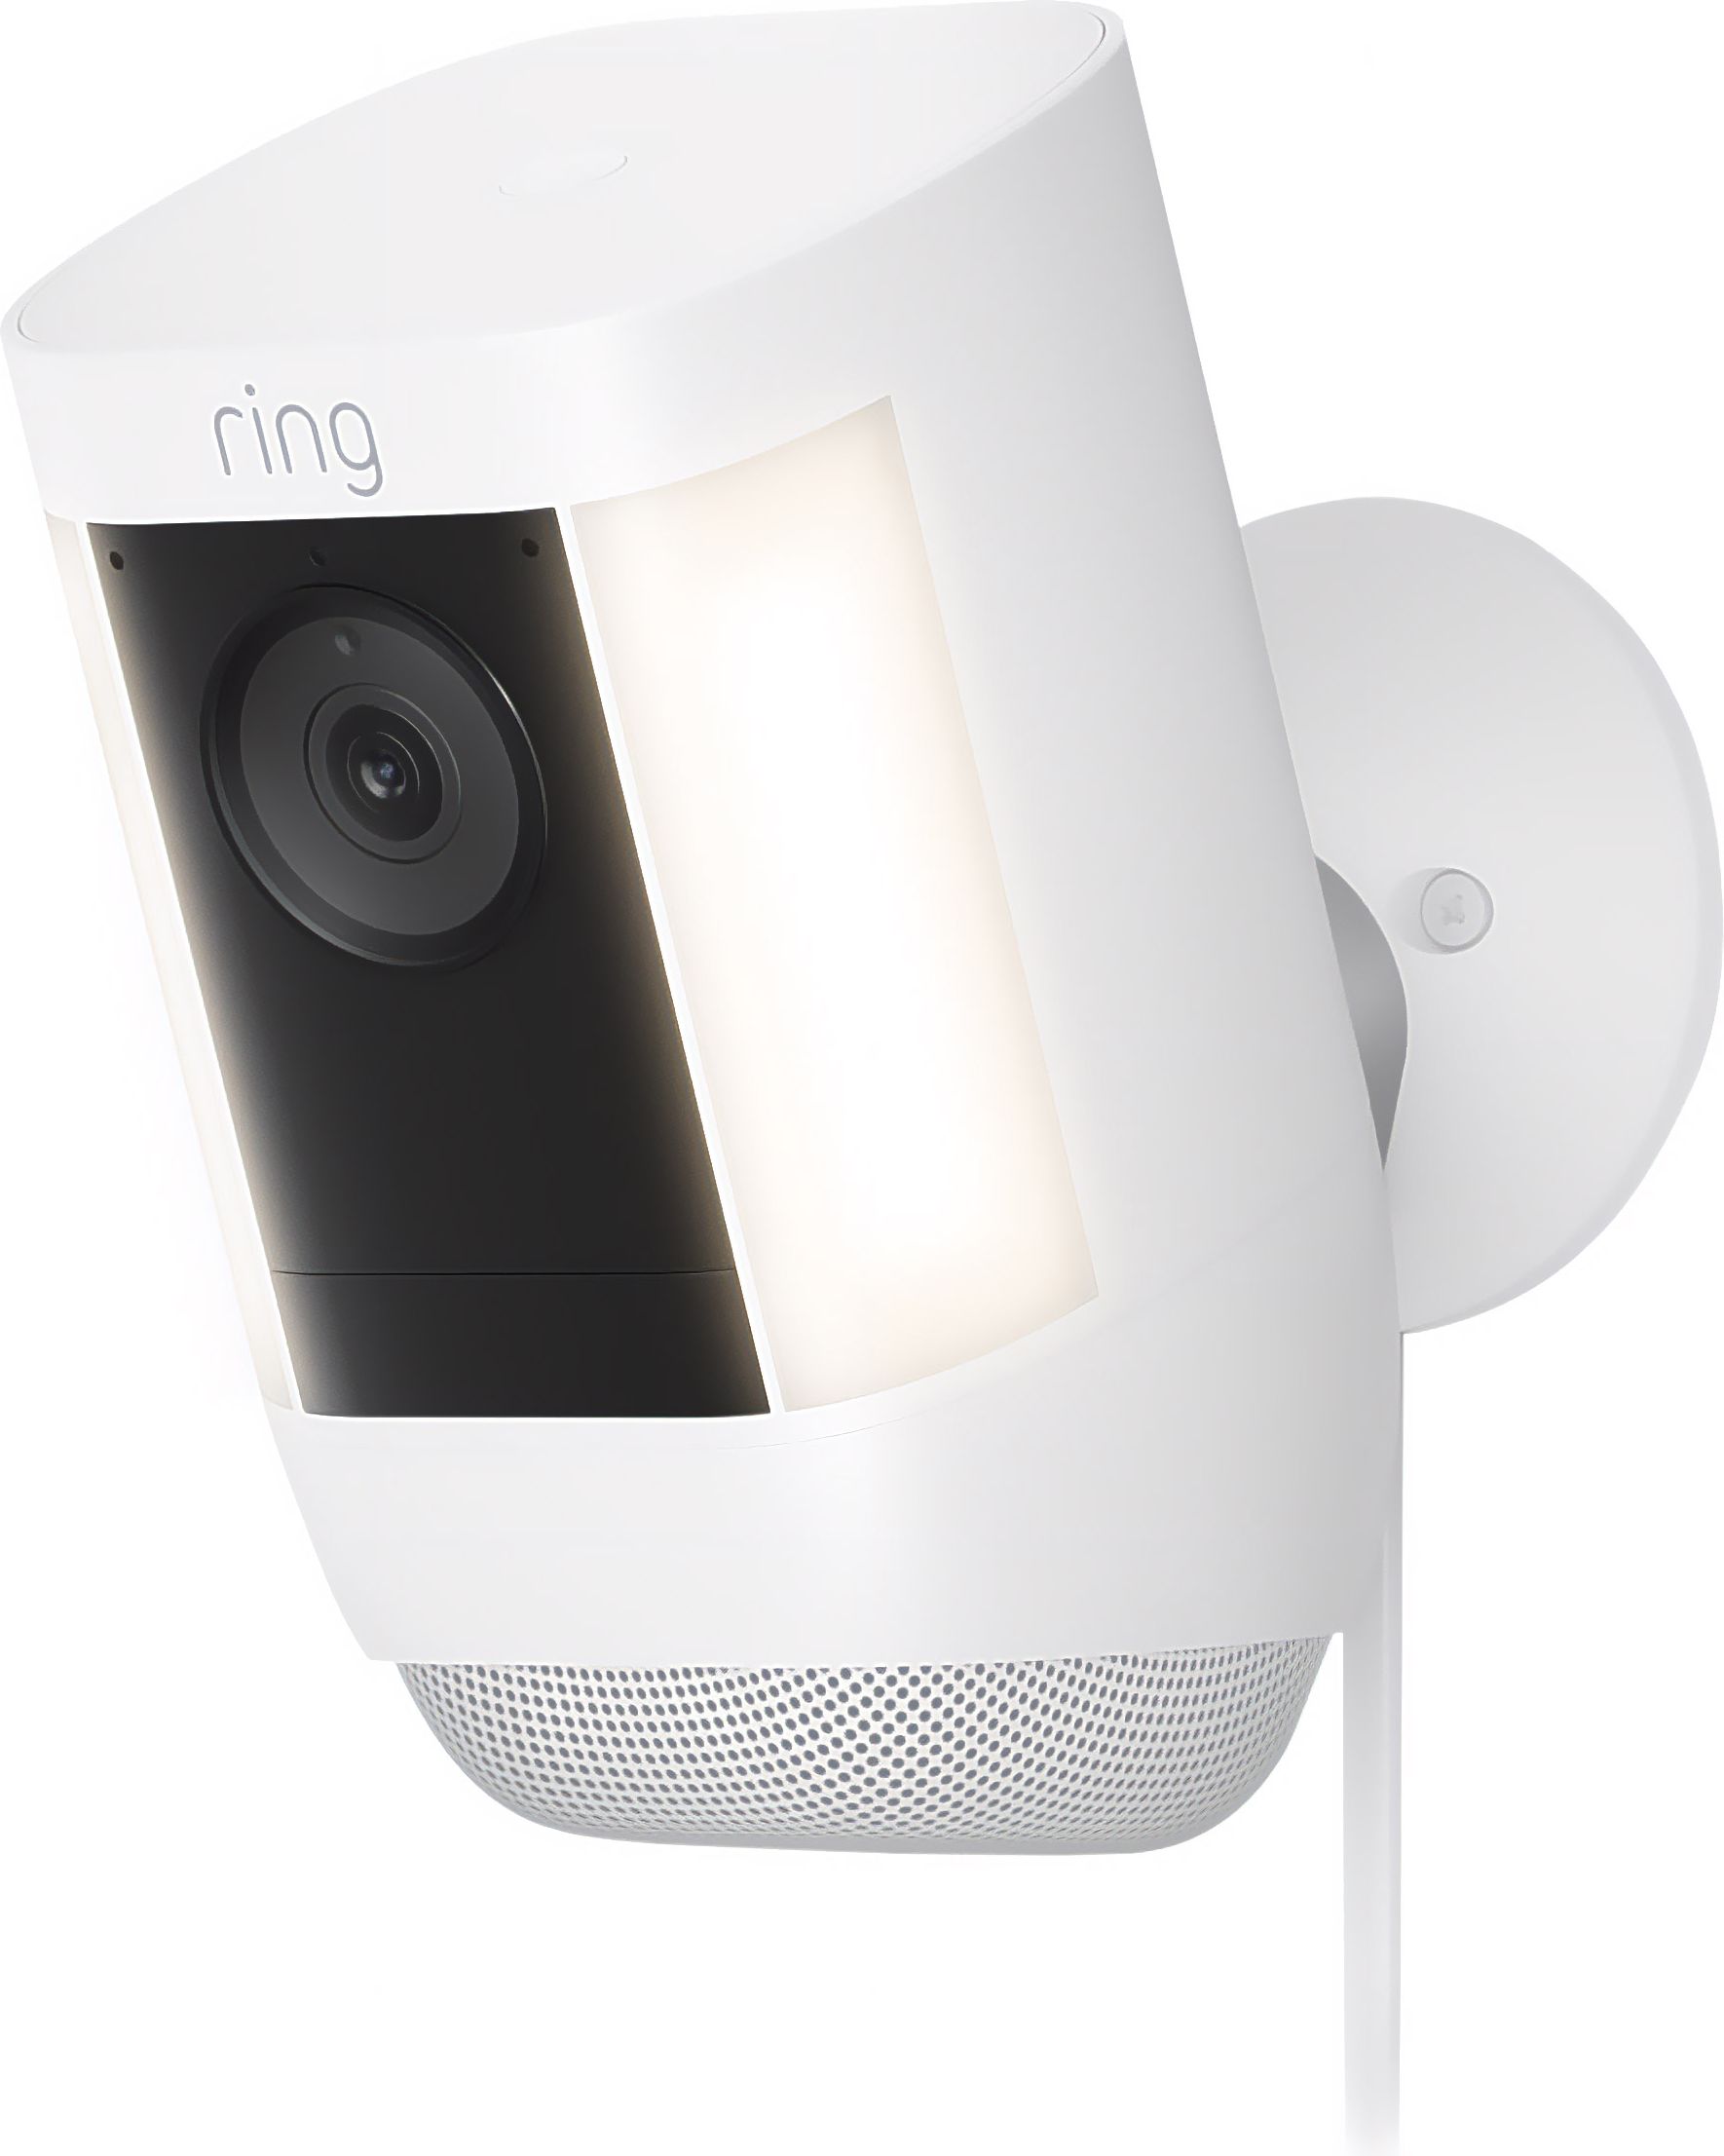 Ring smart home security cameras are on sale at Amazon